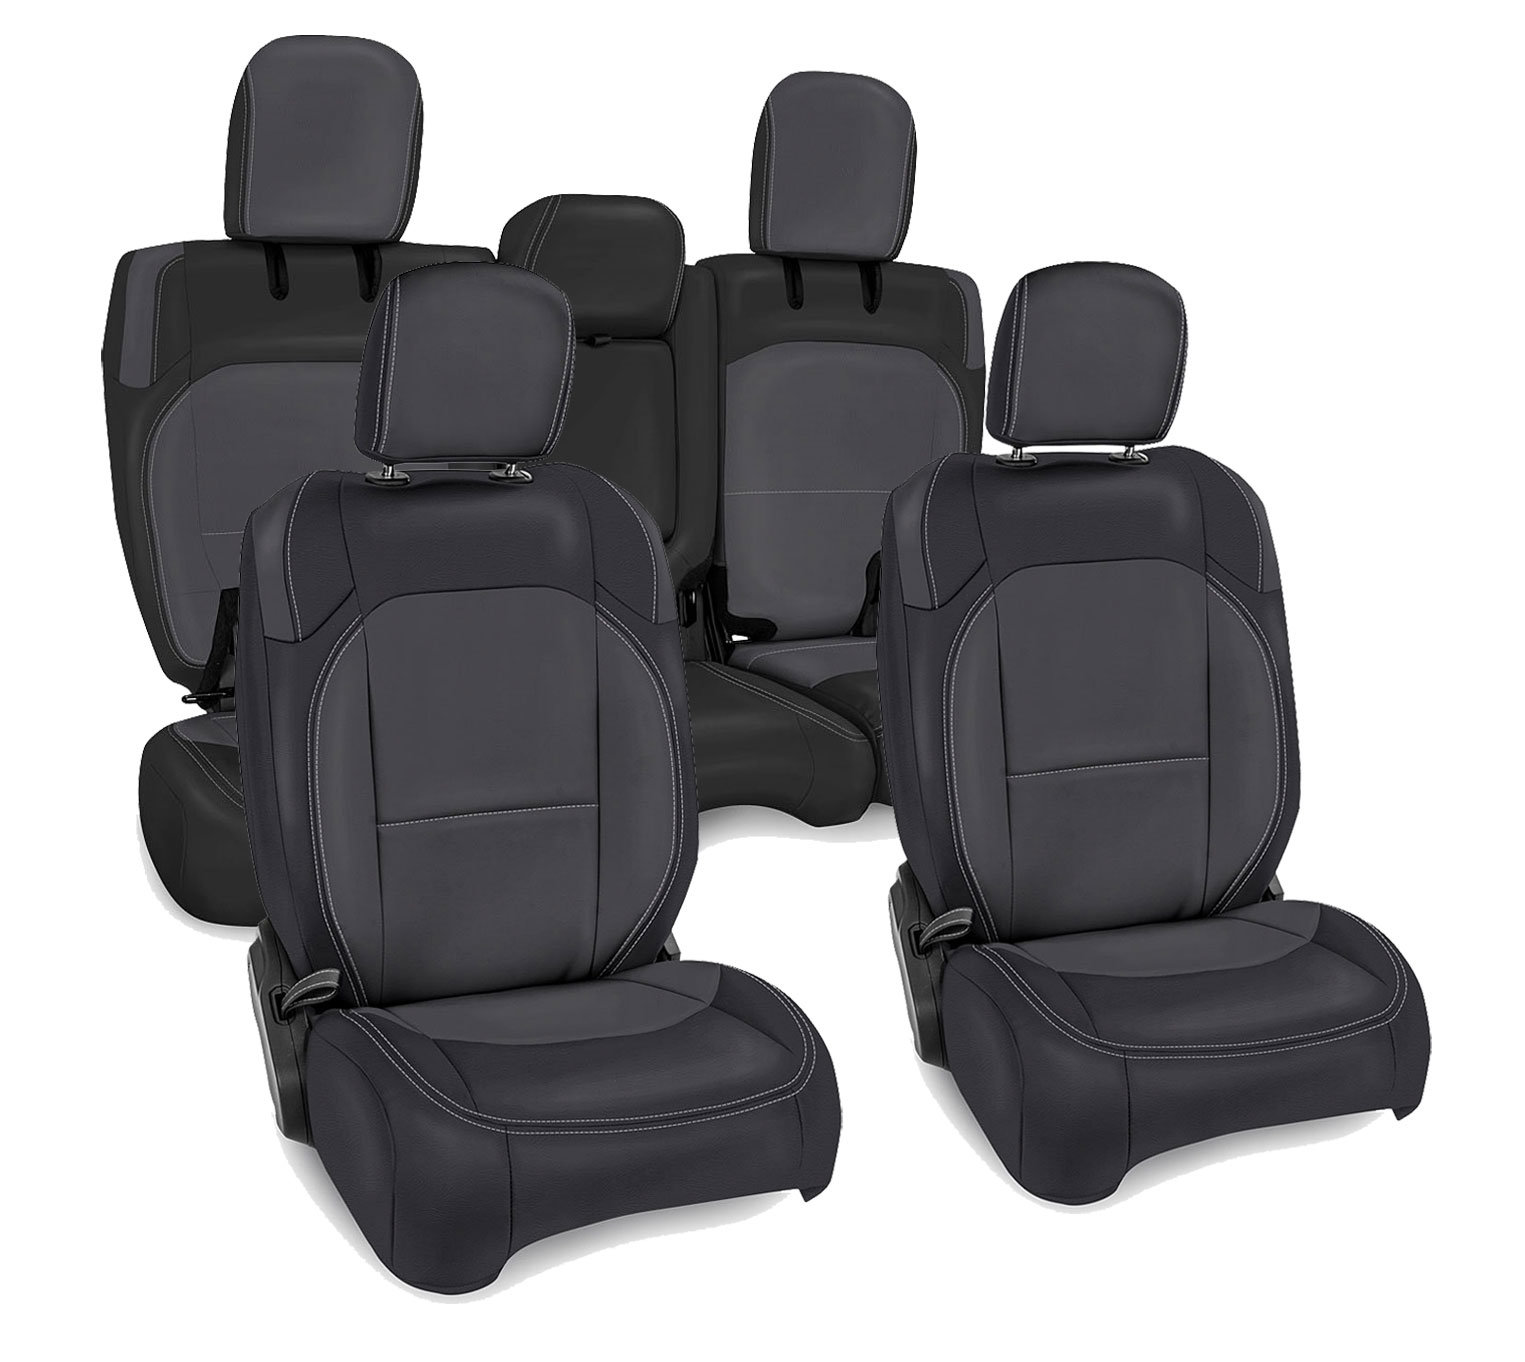 Prp Seats Vinyl Front Rear Seat Cover Sets For 18 21 Jeep Wrangler Jl Unlimited Quadratec - Leather Seat Covers For 2021 Jeep Wrangler Unlimited